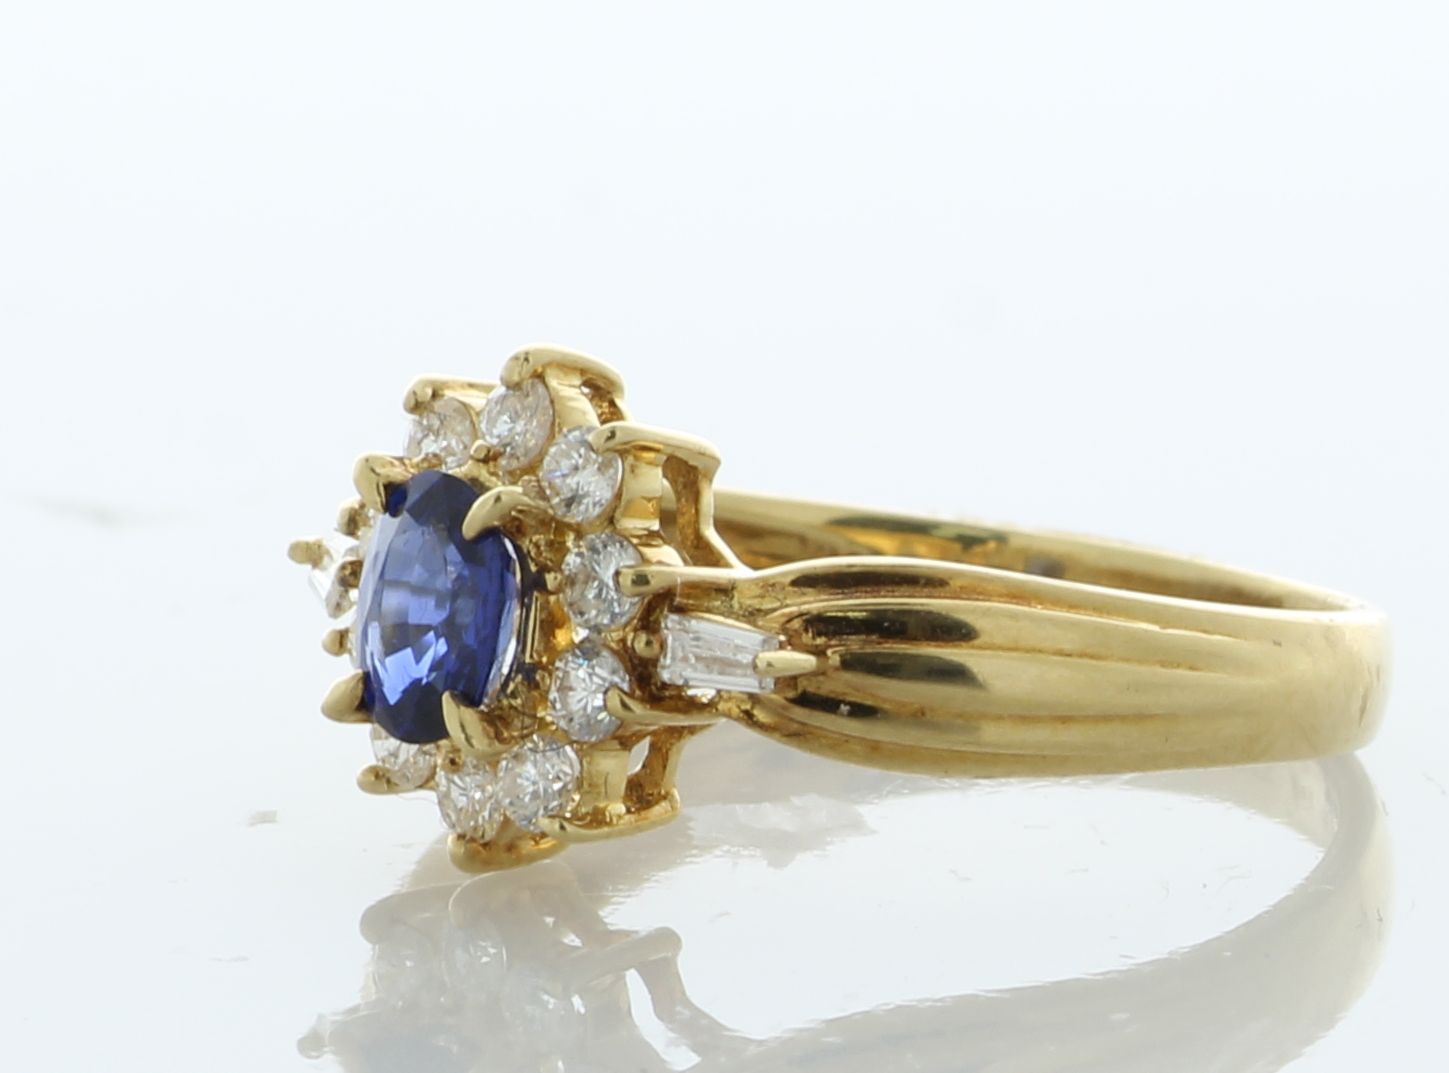 18ct Yellow Gold Oval Cut Sapphire and Diamond Ring (S0.45) 0.30 Carats - Image 4 of 5